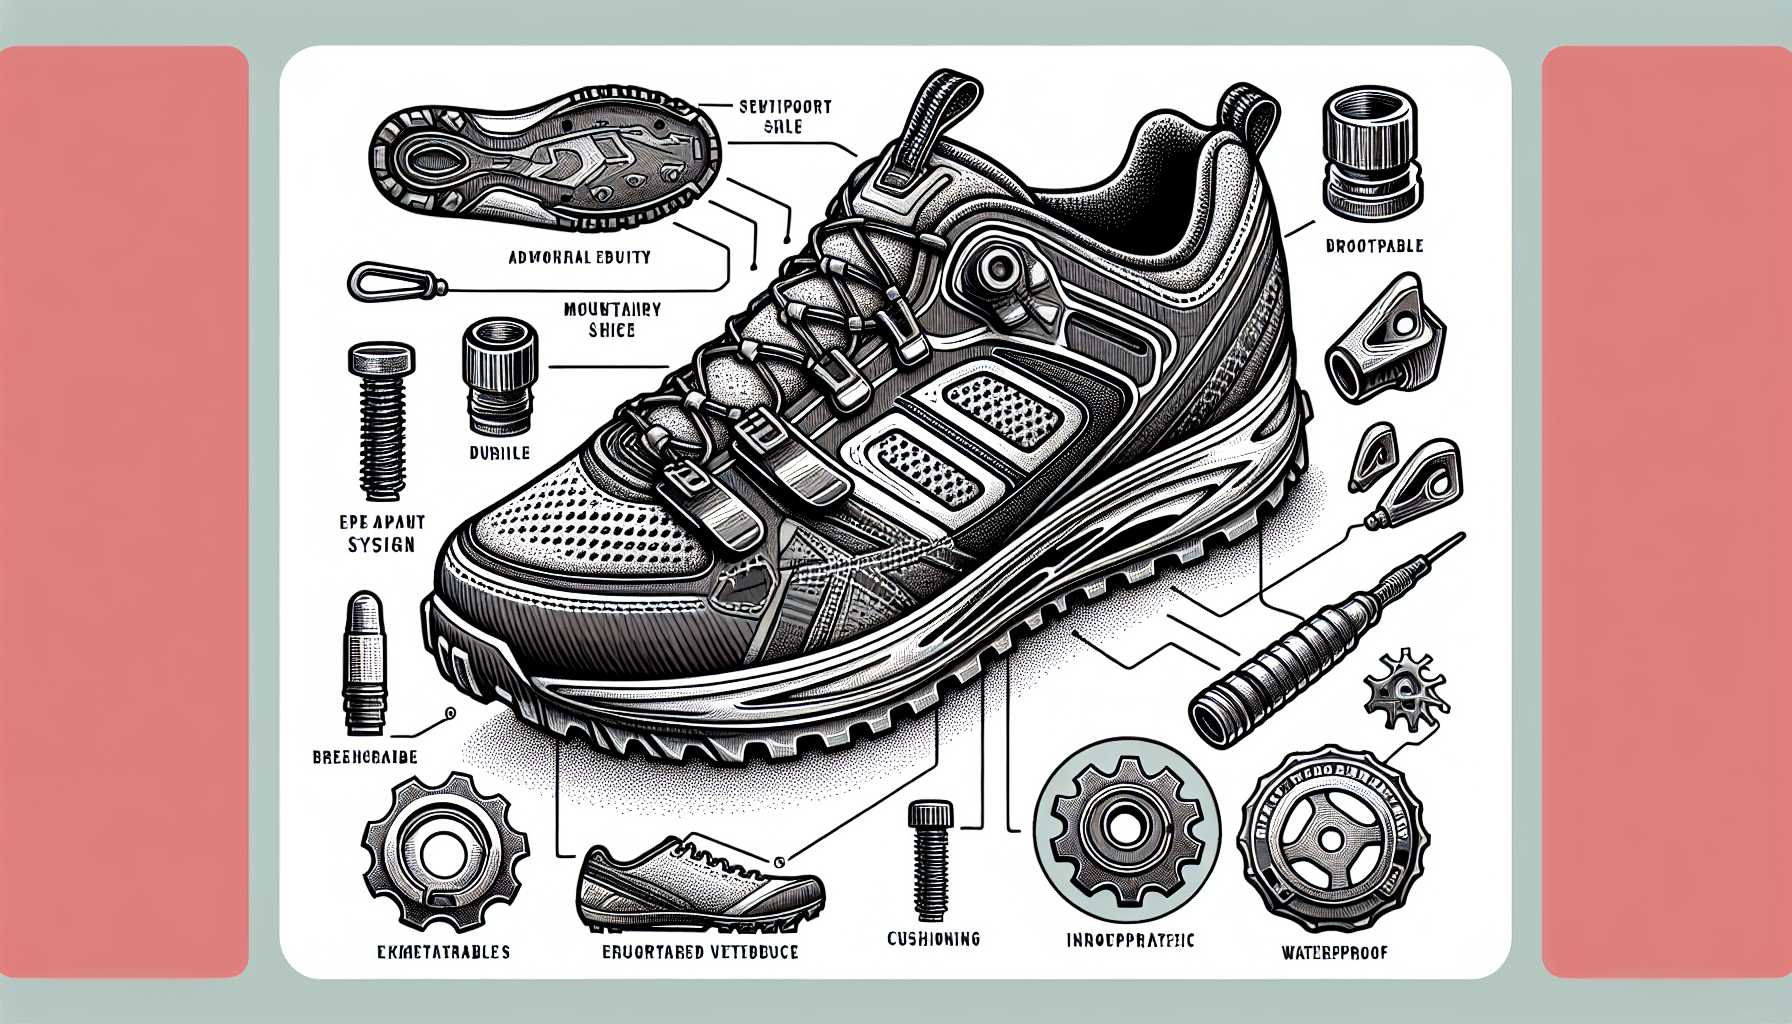 What Makes Good MTB Shoes?